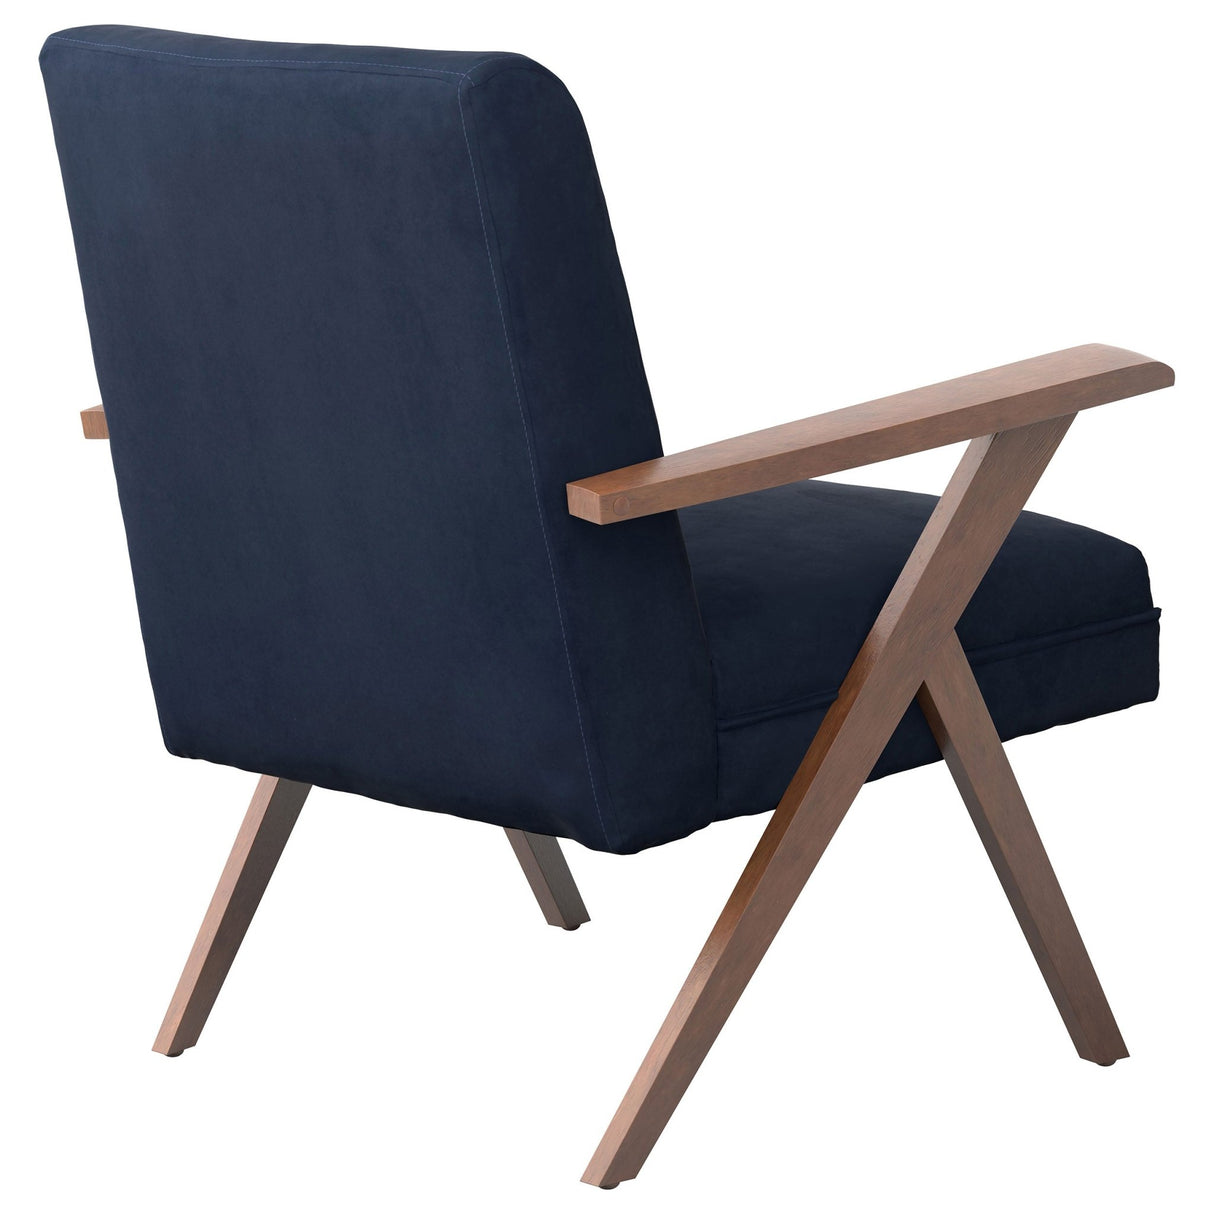 Accent Chair - Cheryl Wooden Arms Accent Chair Dark Blue and Walnut - Accent Chairs - 905415 - image - 8